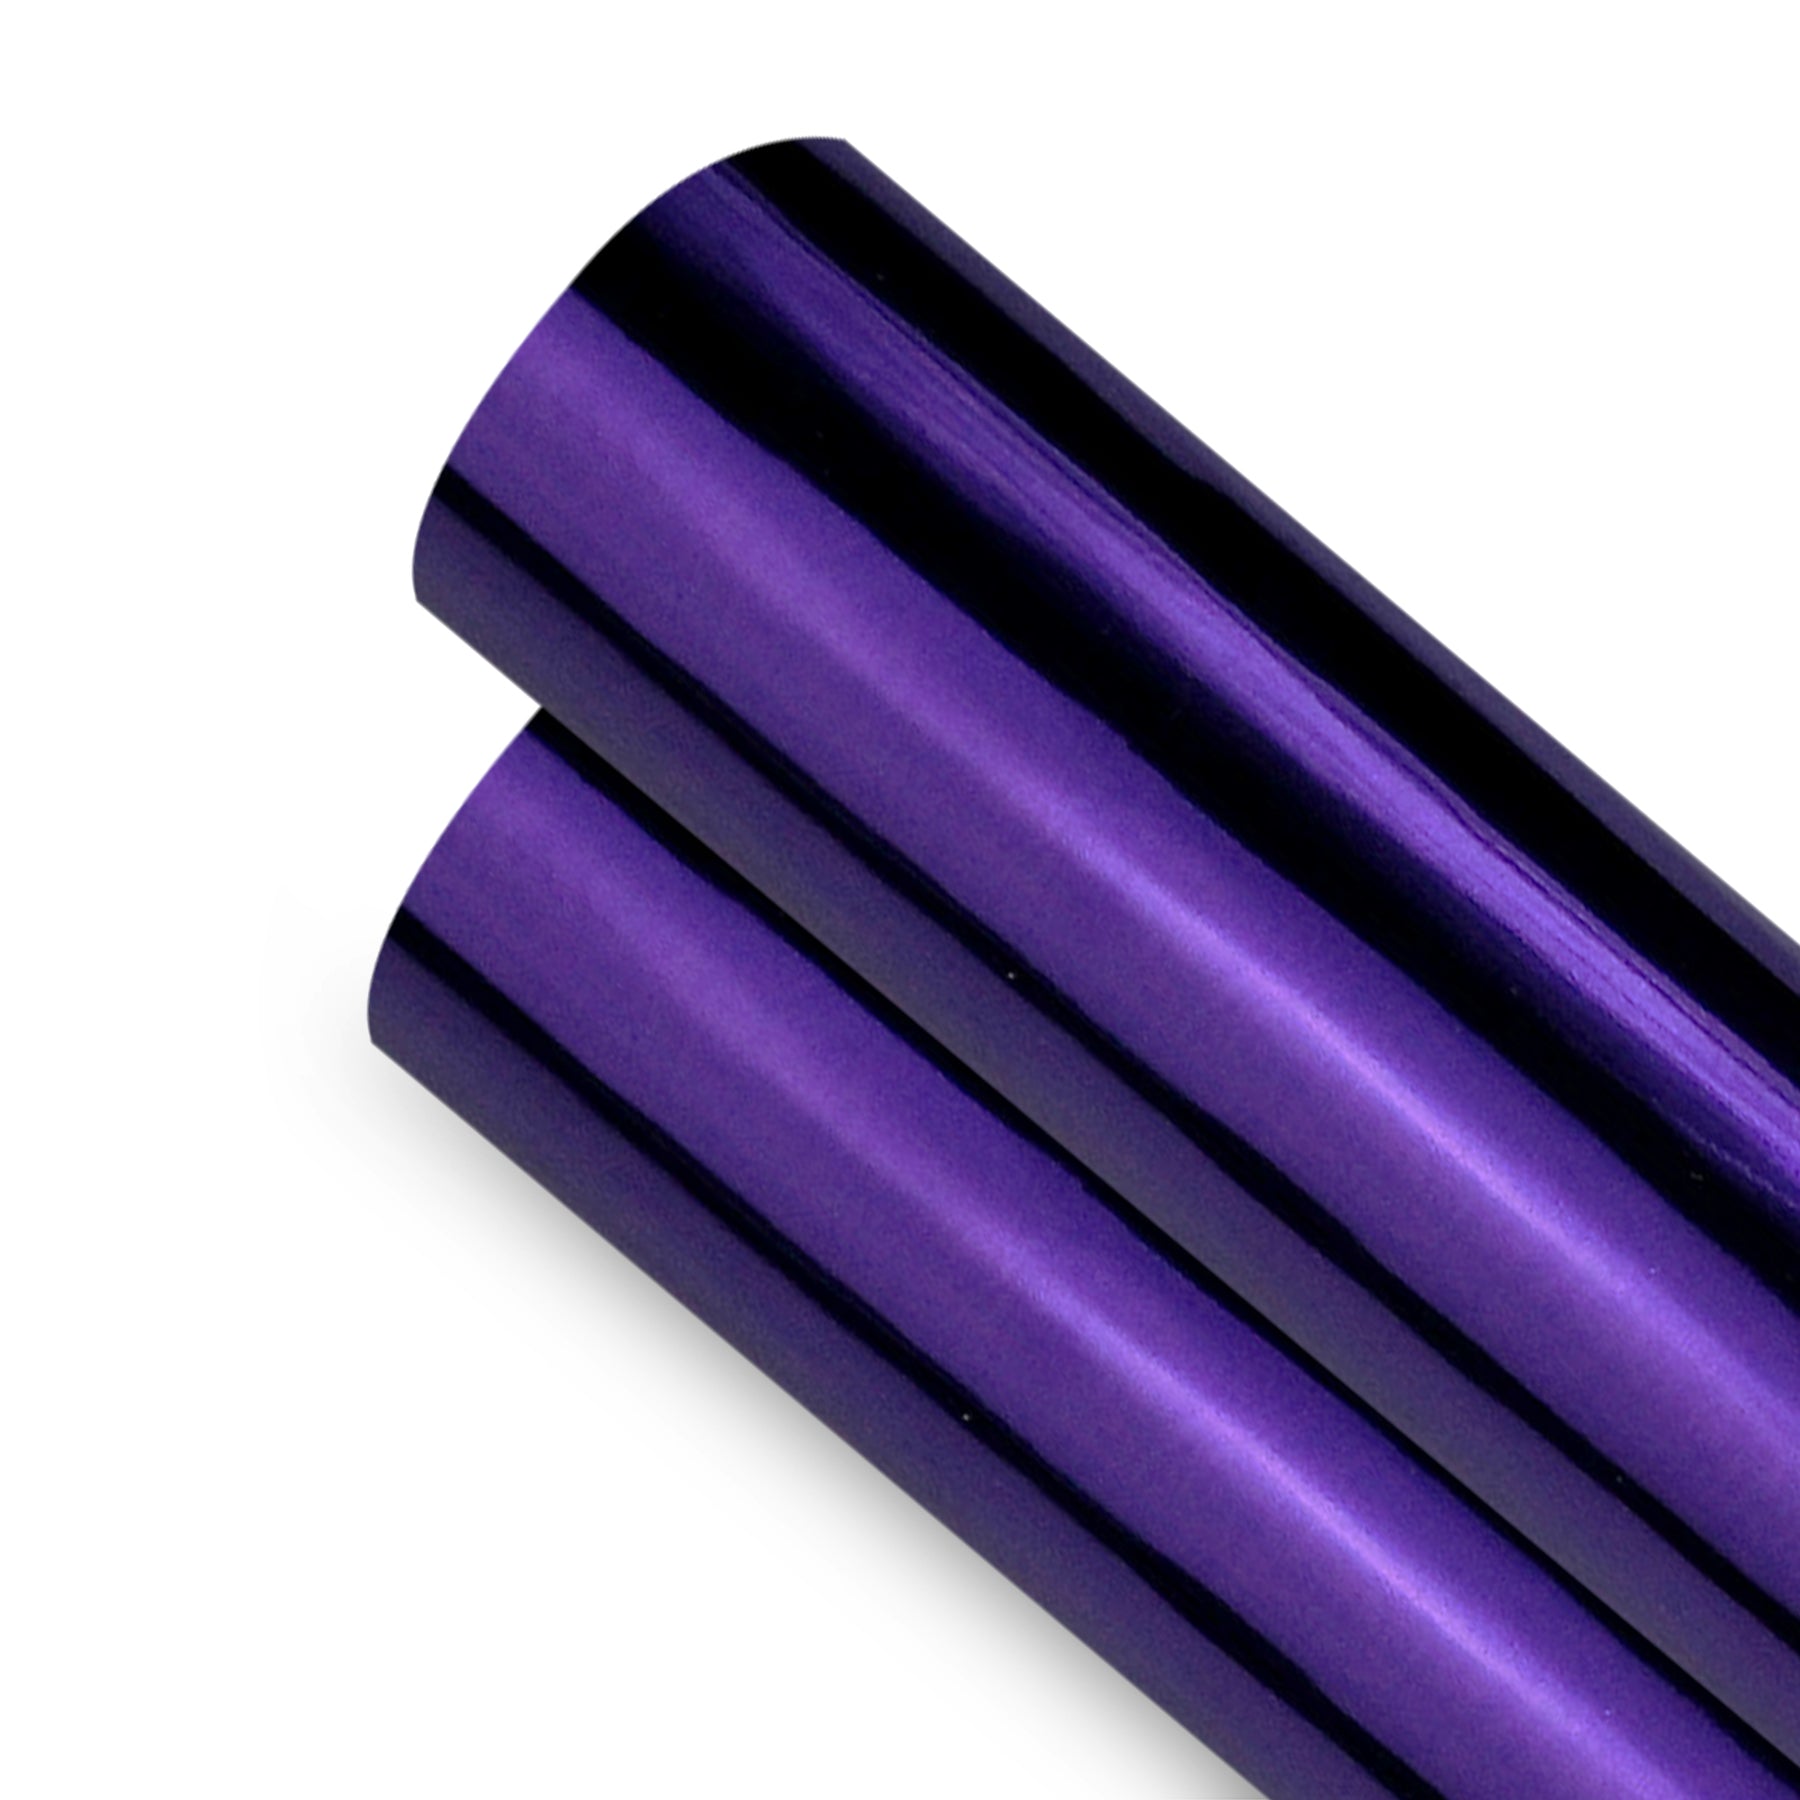 Purple Toner Foil is a metallic foil that has been coated with purple ink or toner. Purple is a hue made by blending blue and red. It is a deep, rich purple that can range from a dark, royal purple to a light, lavender tint.